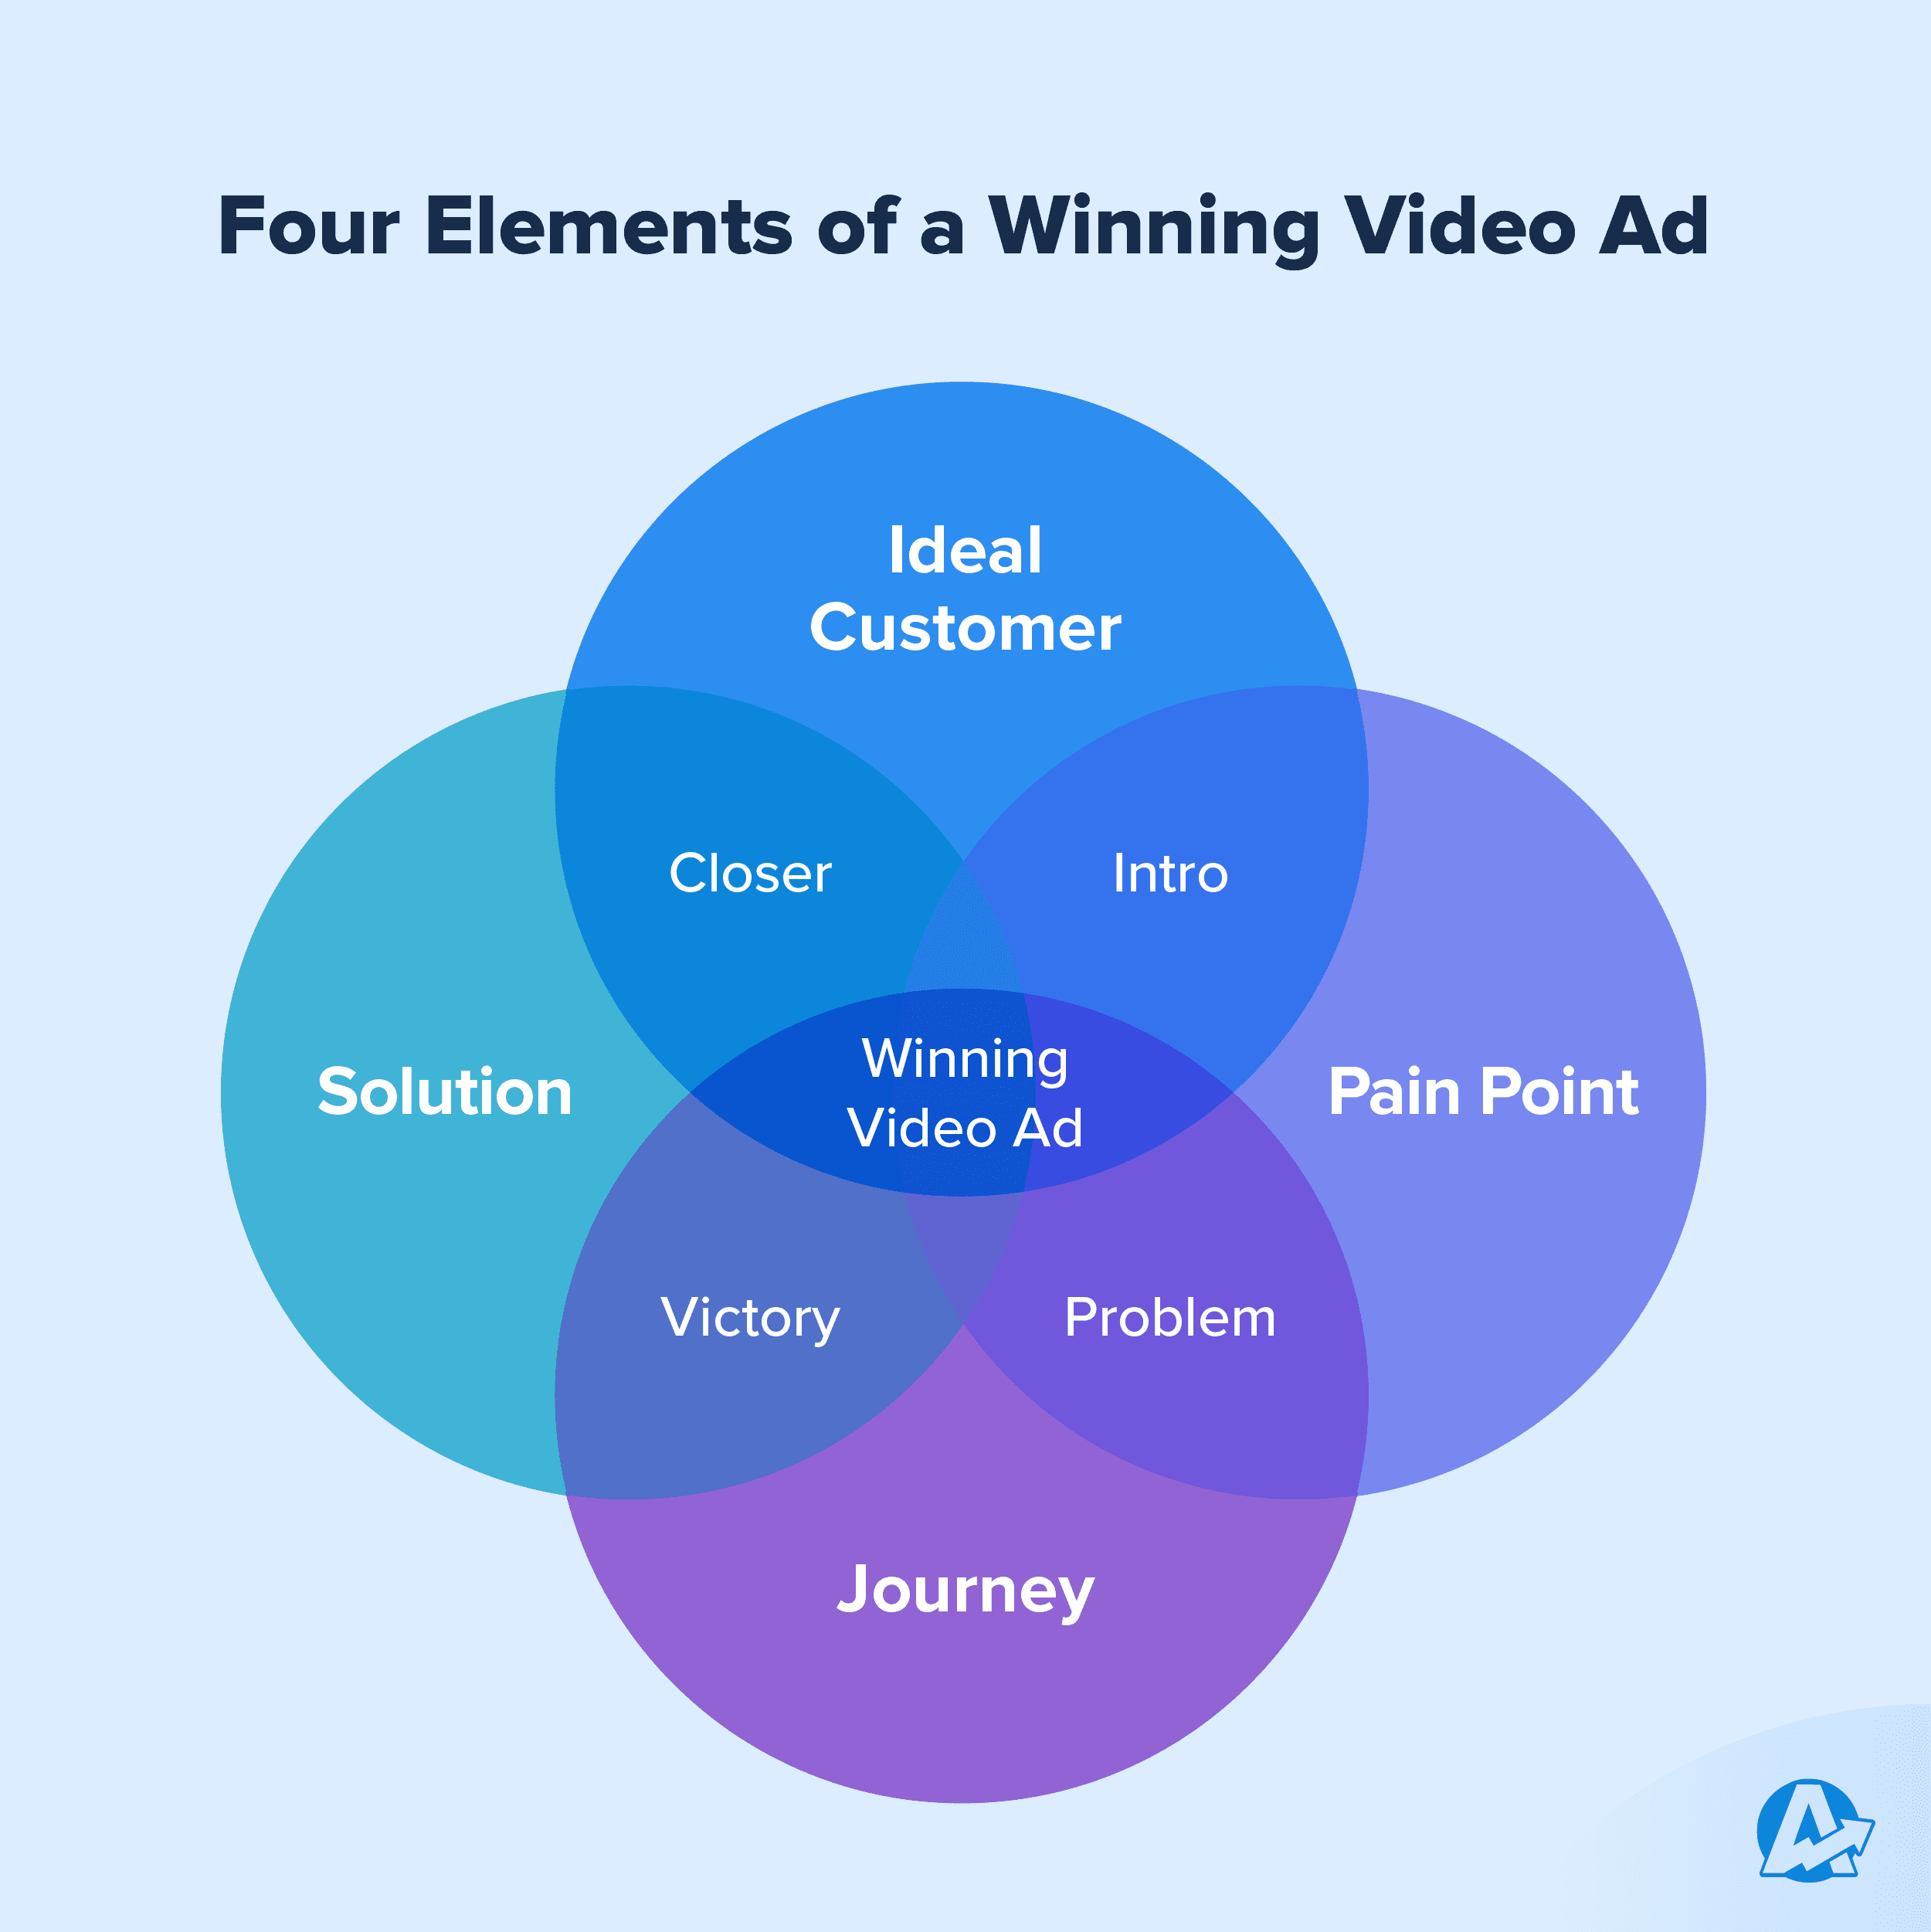 Chart Showing the Four Elements of a Winning Video